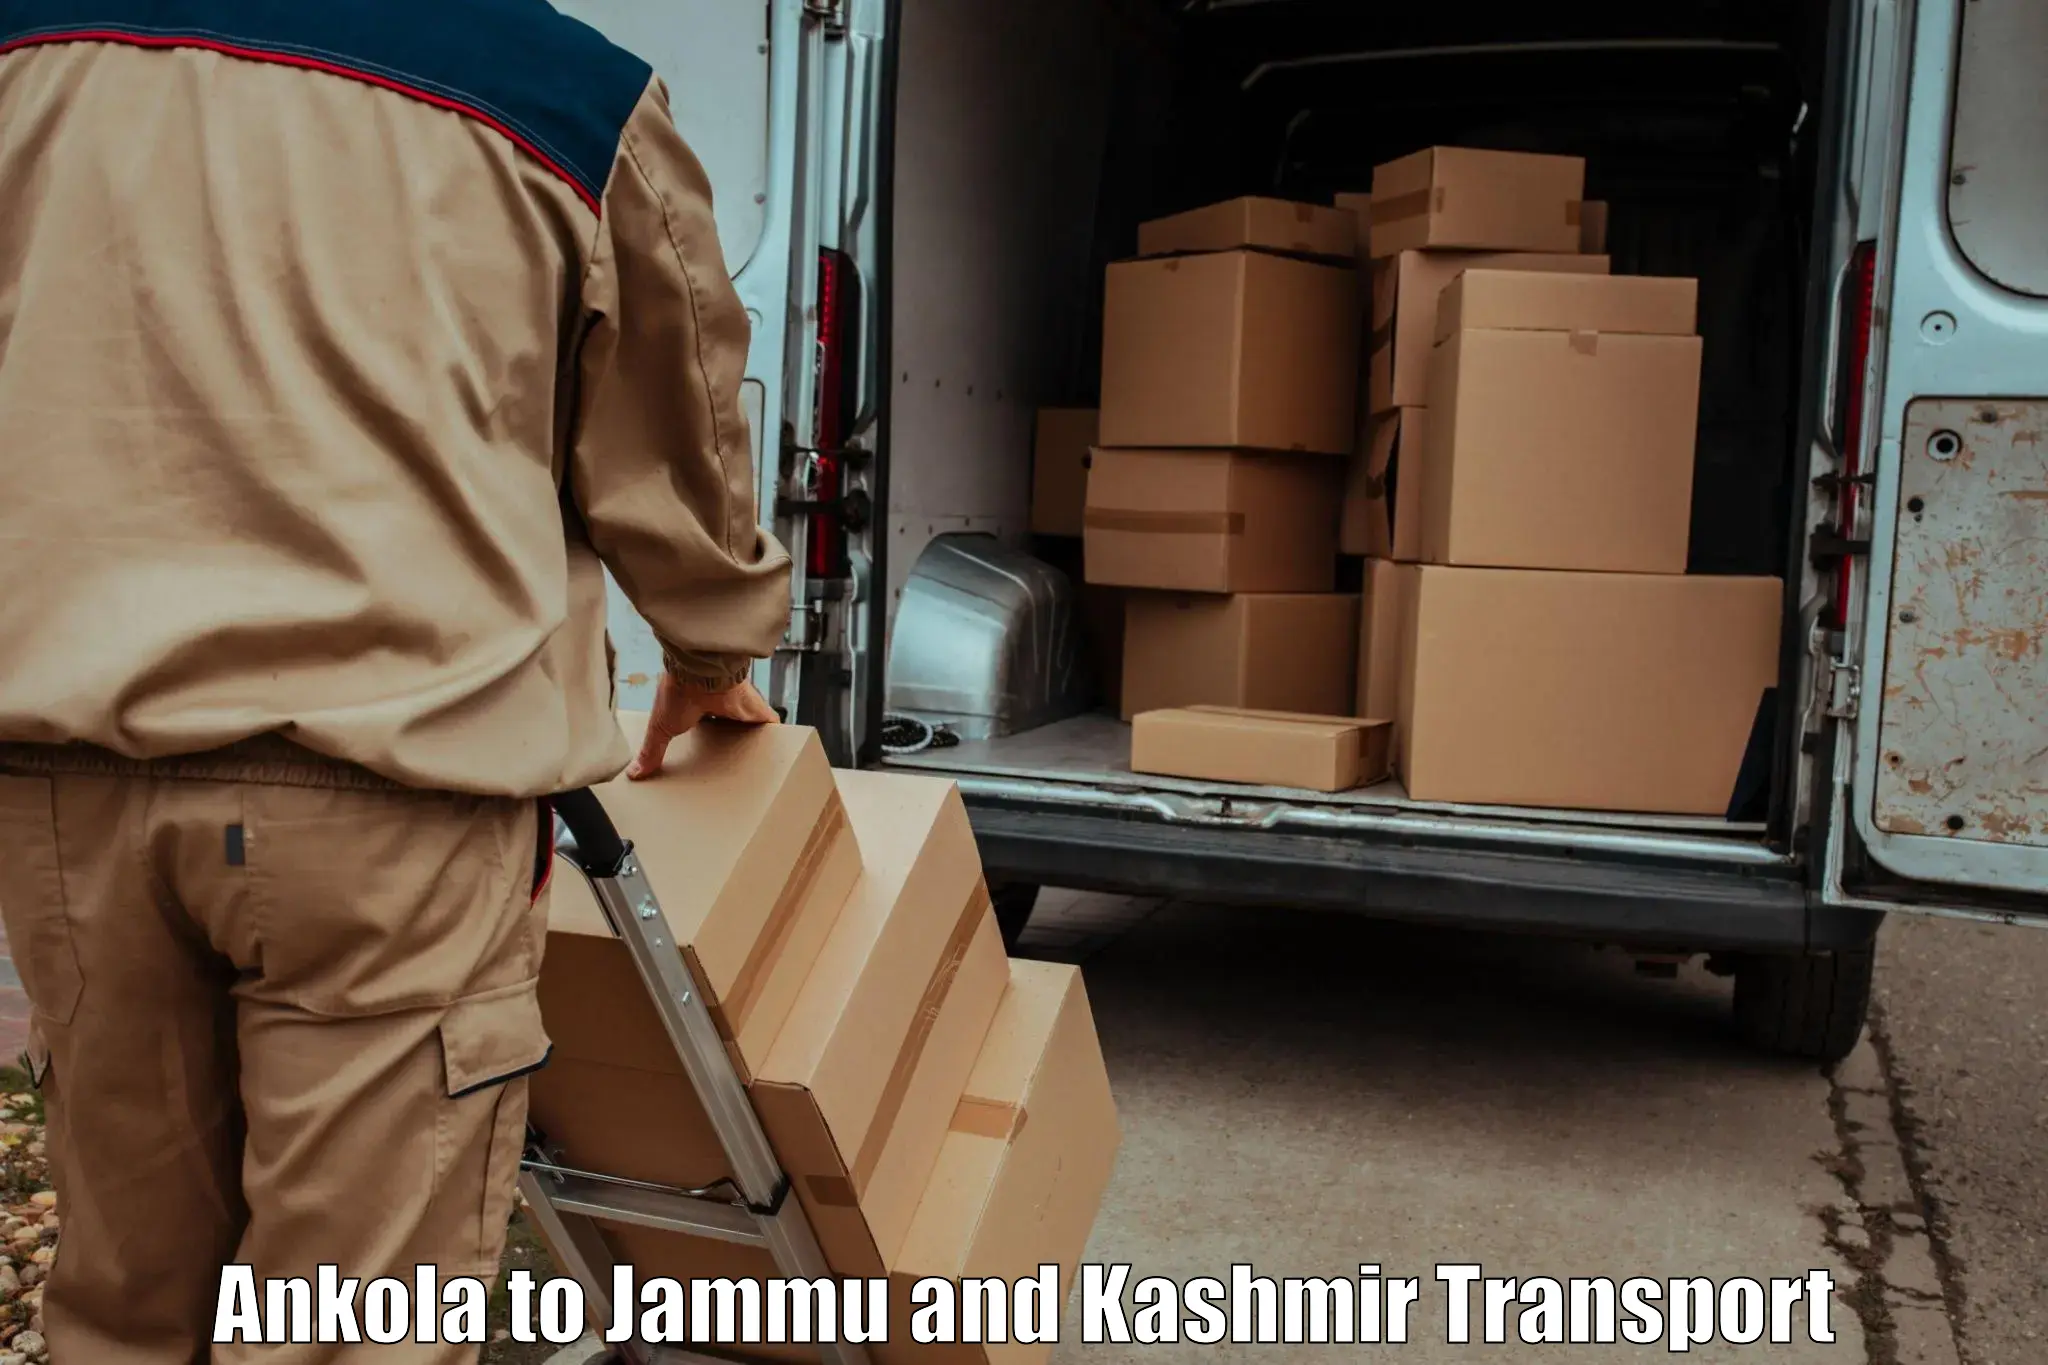 Transport bike from one state to another Ankola to Shopian